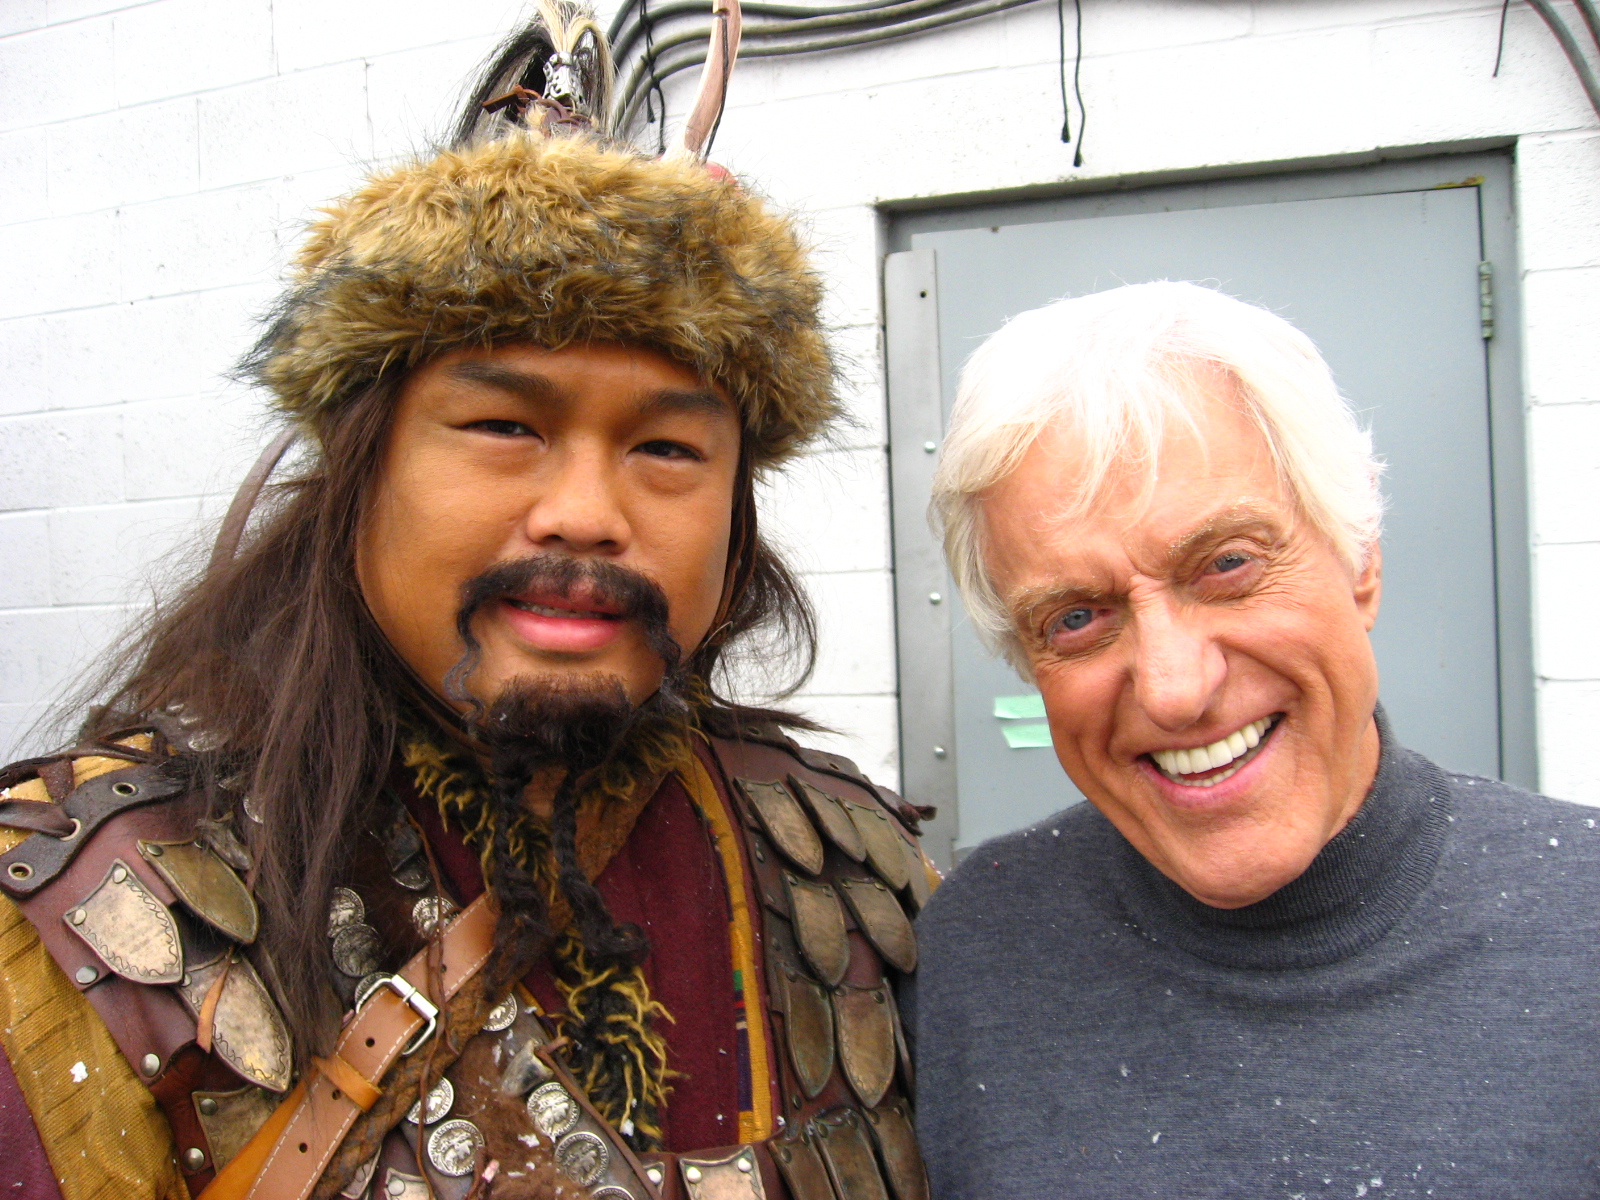 With Dick Van Dyke, Night At The Museum